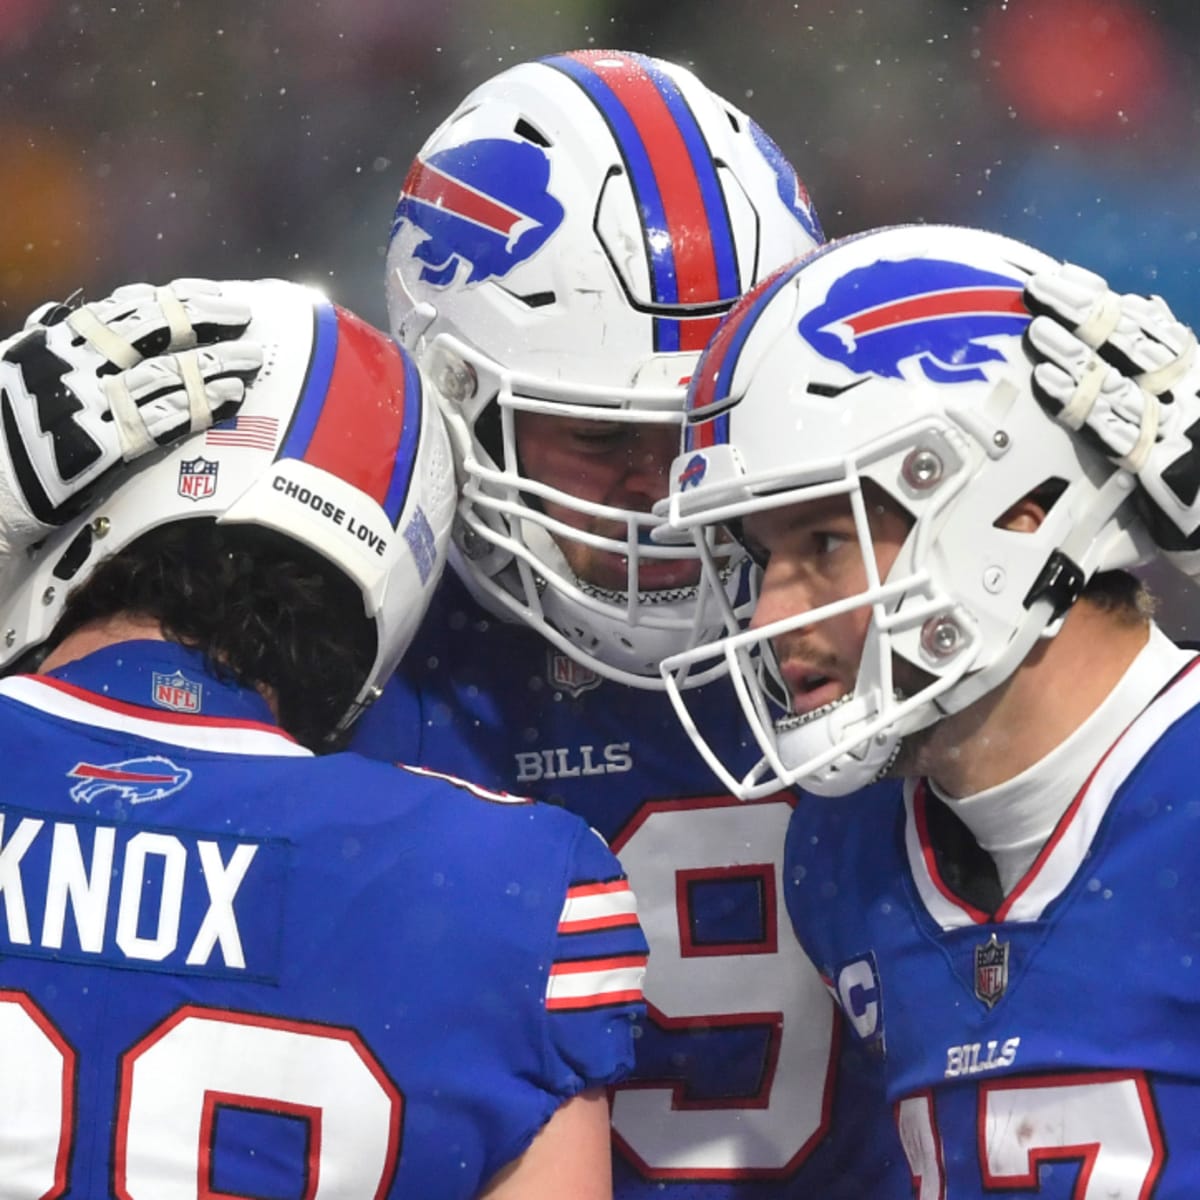 NFL playoff picture after Bills clinch AFC East, Packers close in on No. 1  seed  Updated AFC, NFC standings, seeds, projected postseason matchups in  Week 15 